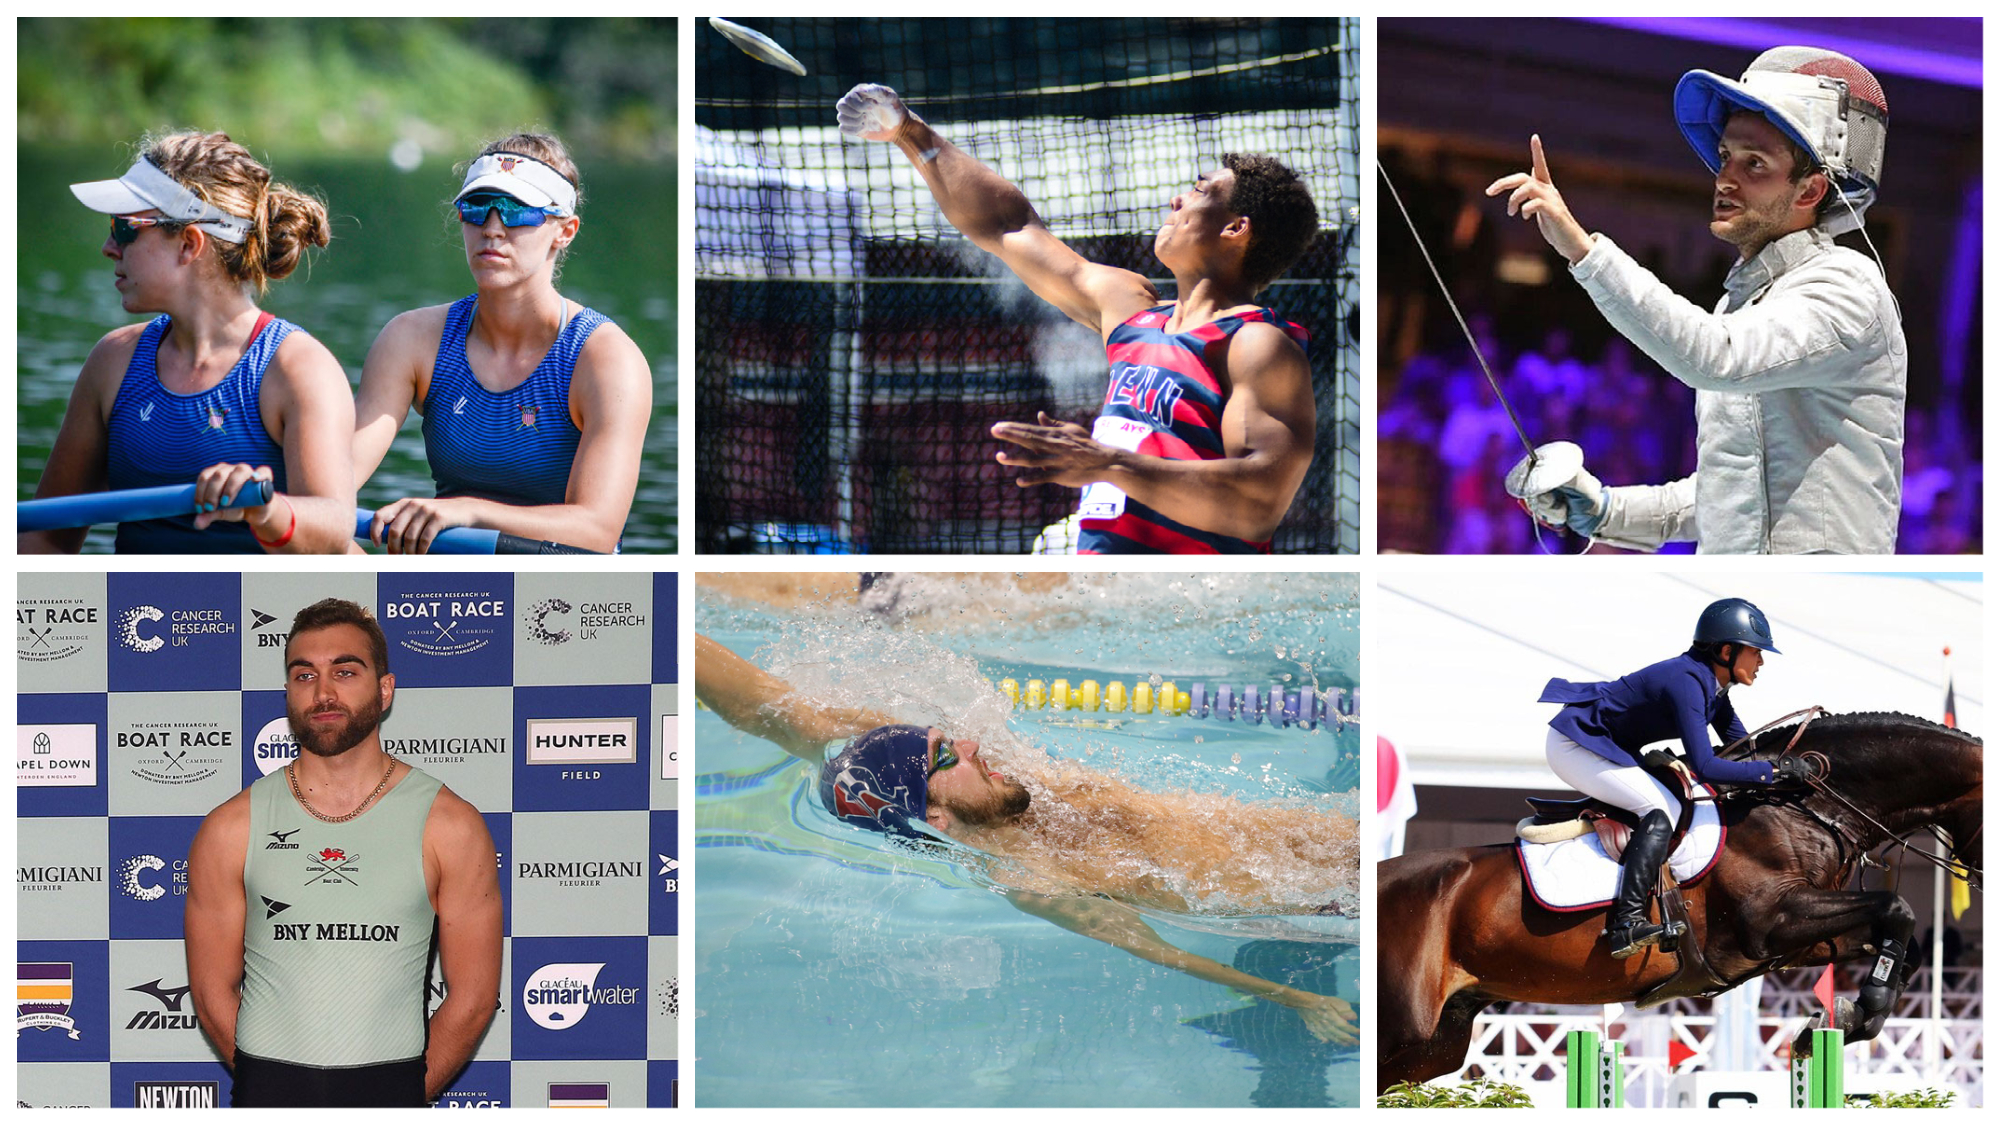 Six Penn athletes perform rowing, discus throwing, fencing swimming, skulls, and equestrian.